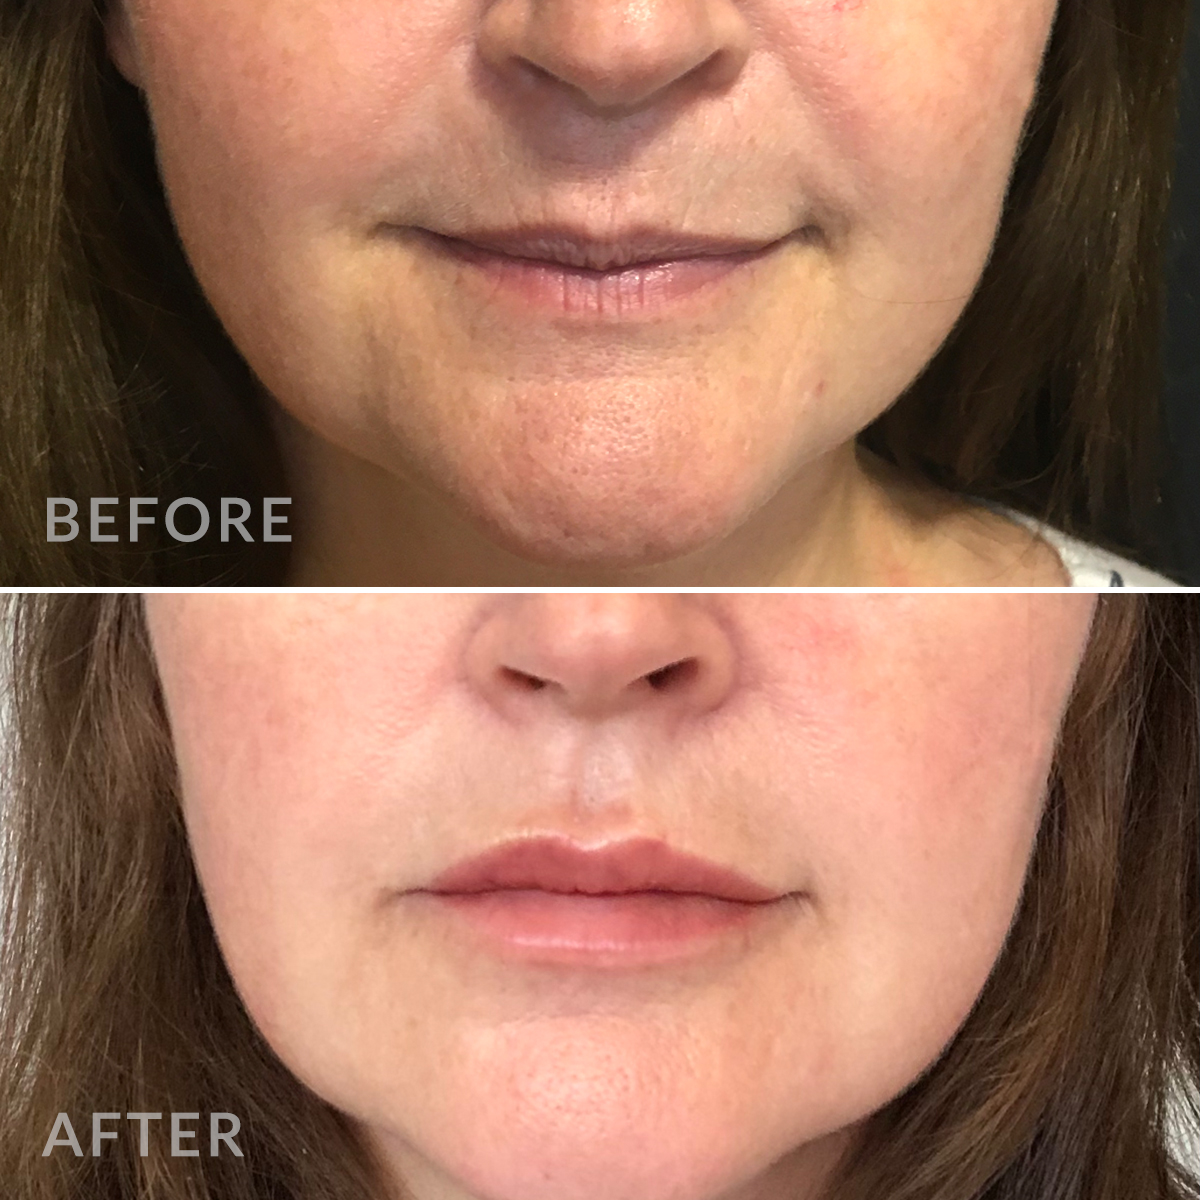 Mouth area rejuvenation - before and after